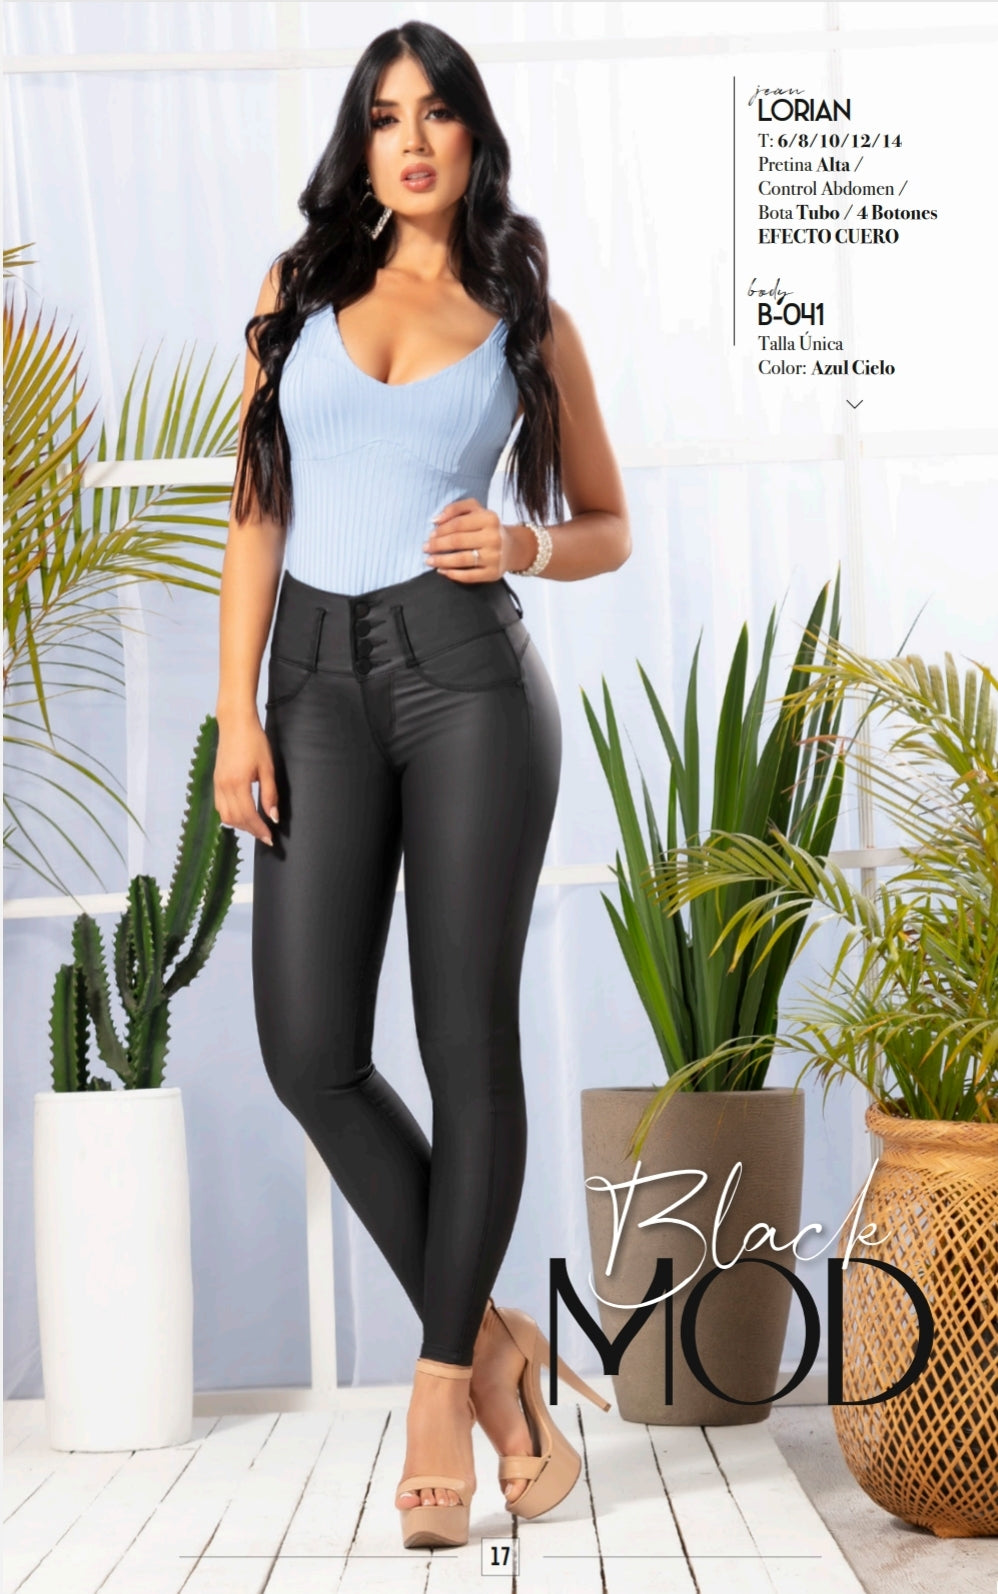 LORIAN PUSH UP JEANS – Tammy's High Fashion